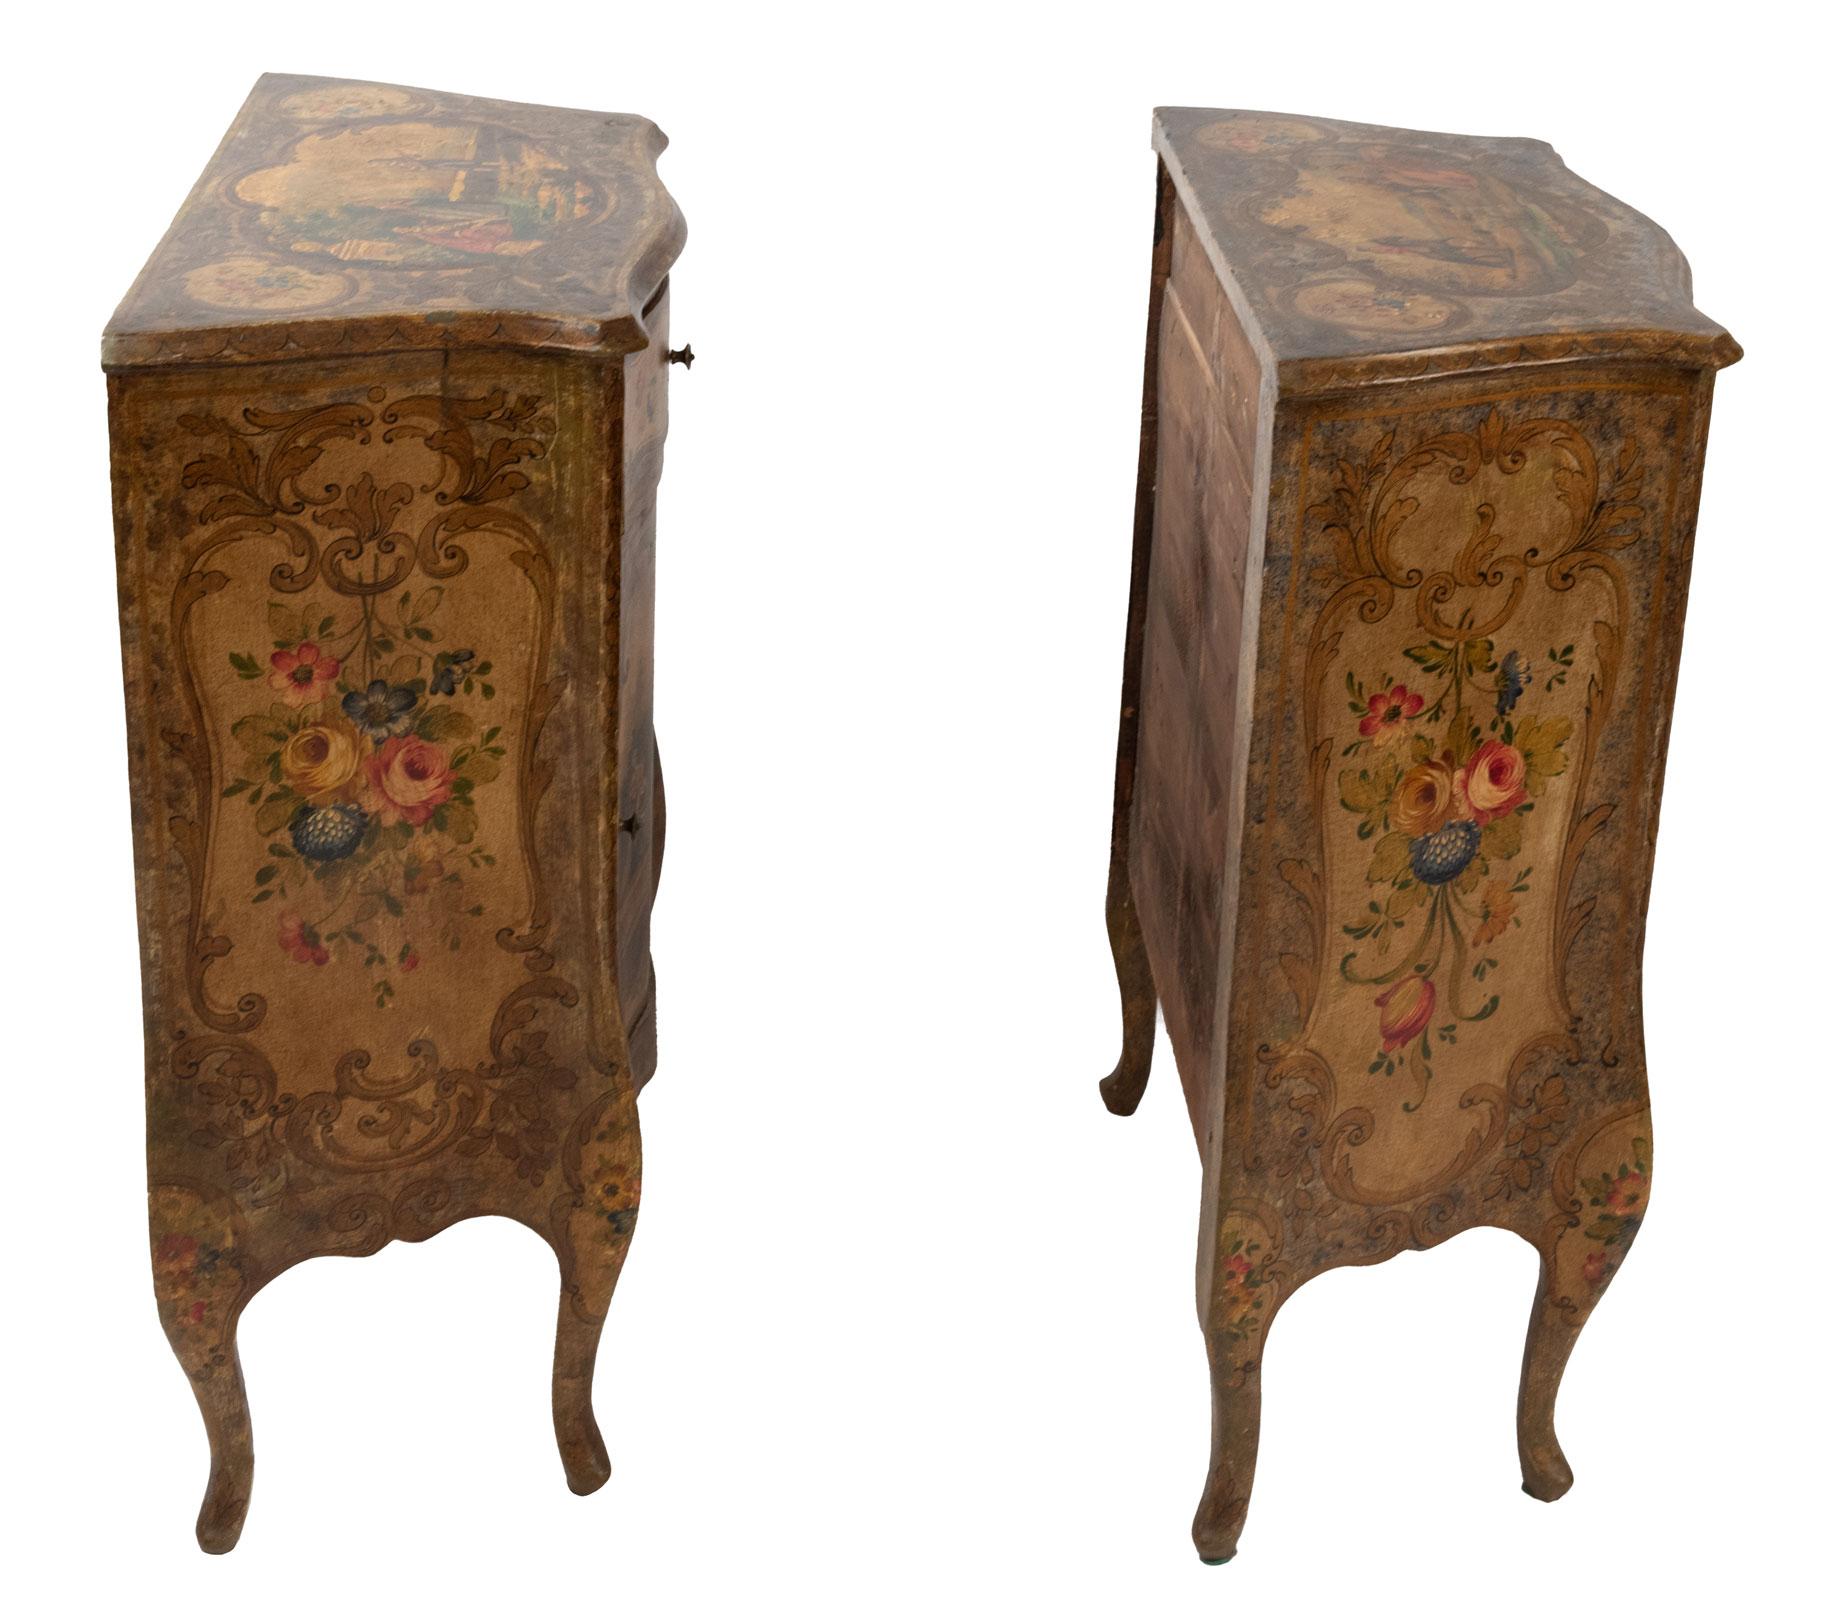 Painted Pair of Venetian Commodes